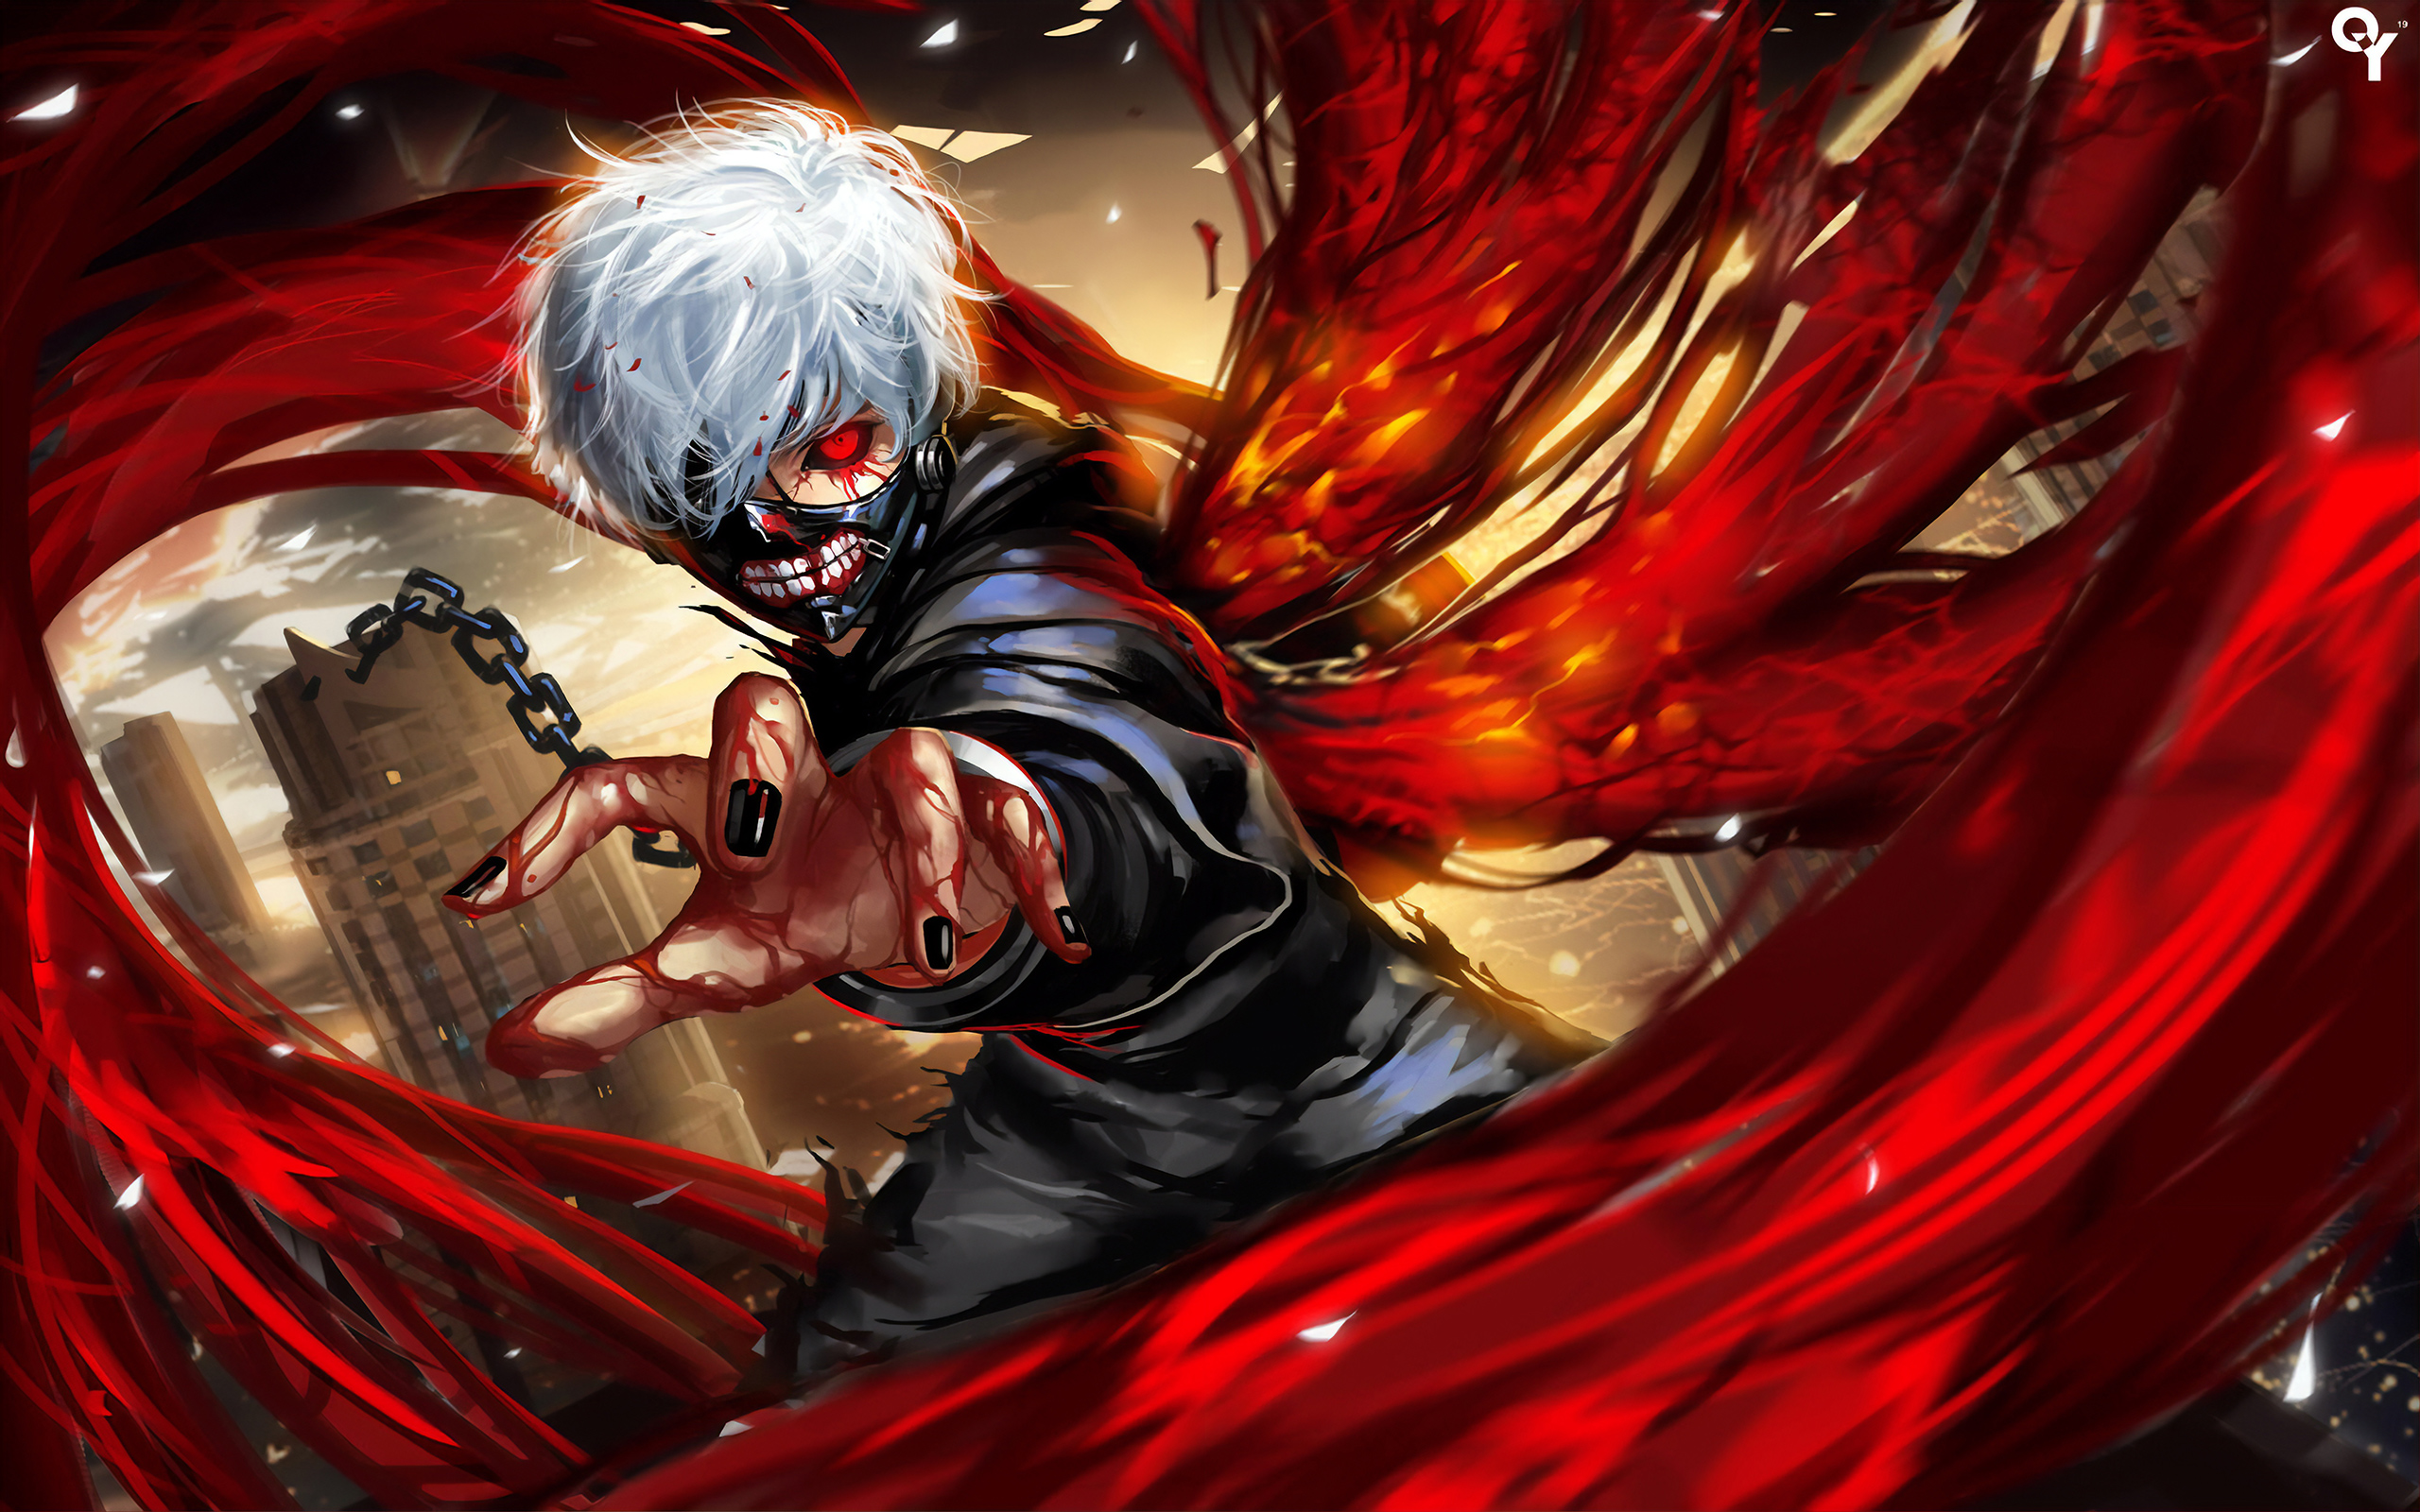 Anime Tokyo Ghoul Art by Liang Xing